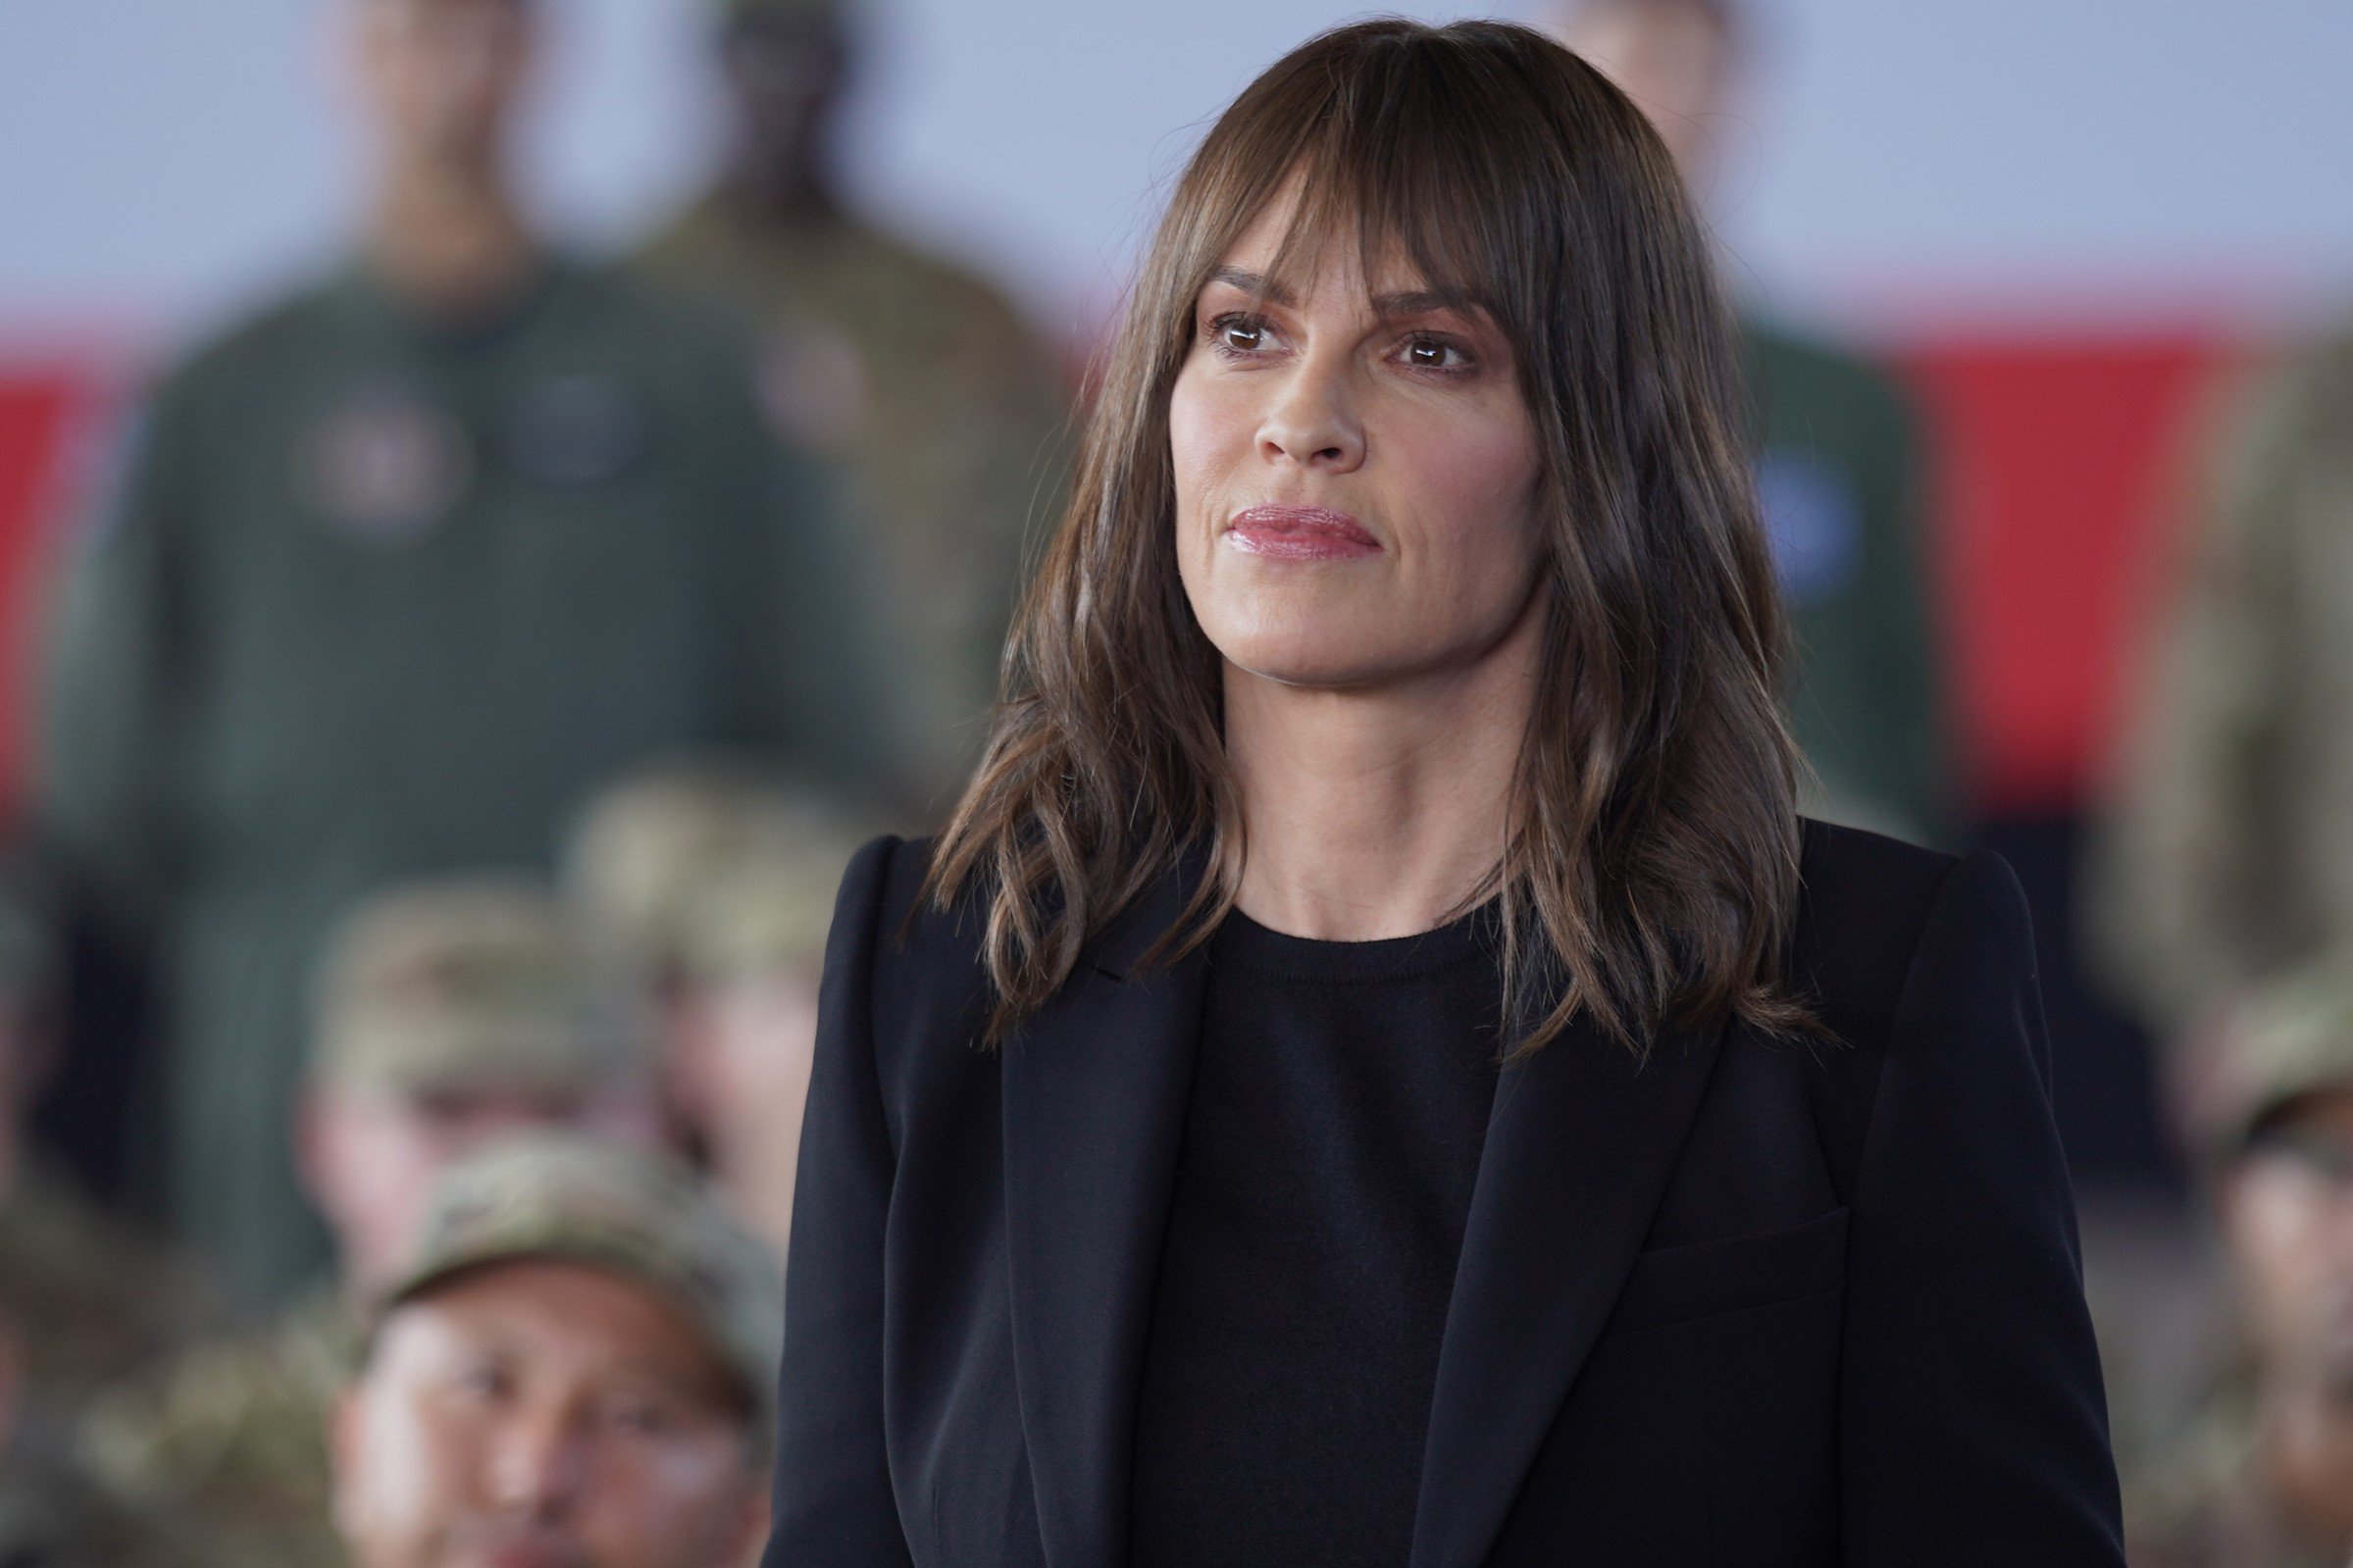 Hilary Swank, in character as Eileen Fitzgerald in 'Alaska Daily' Episode 5, wears a black suit over a black shirt.